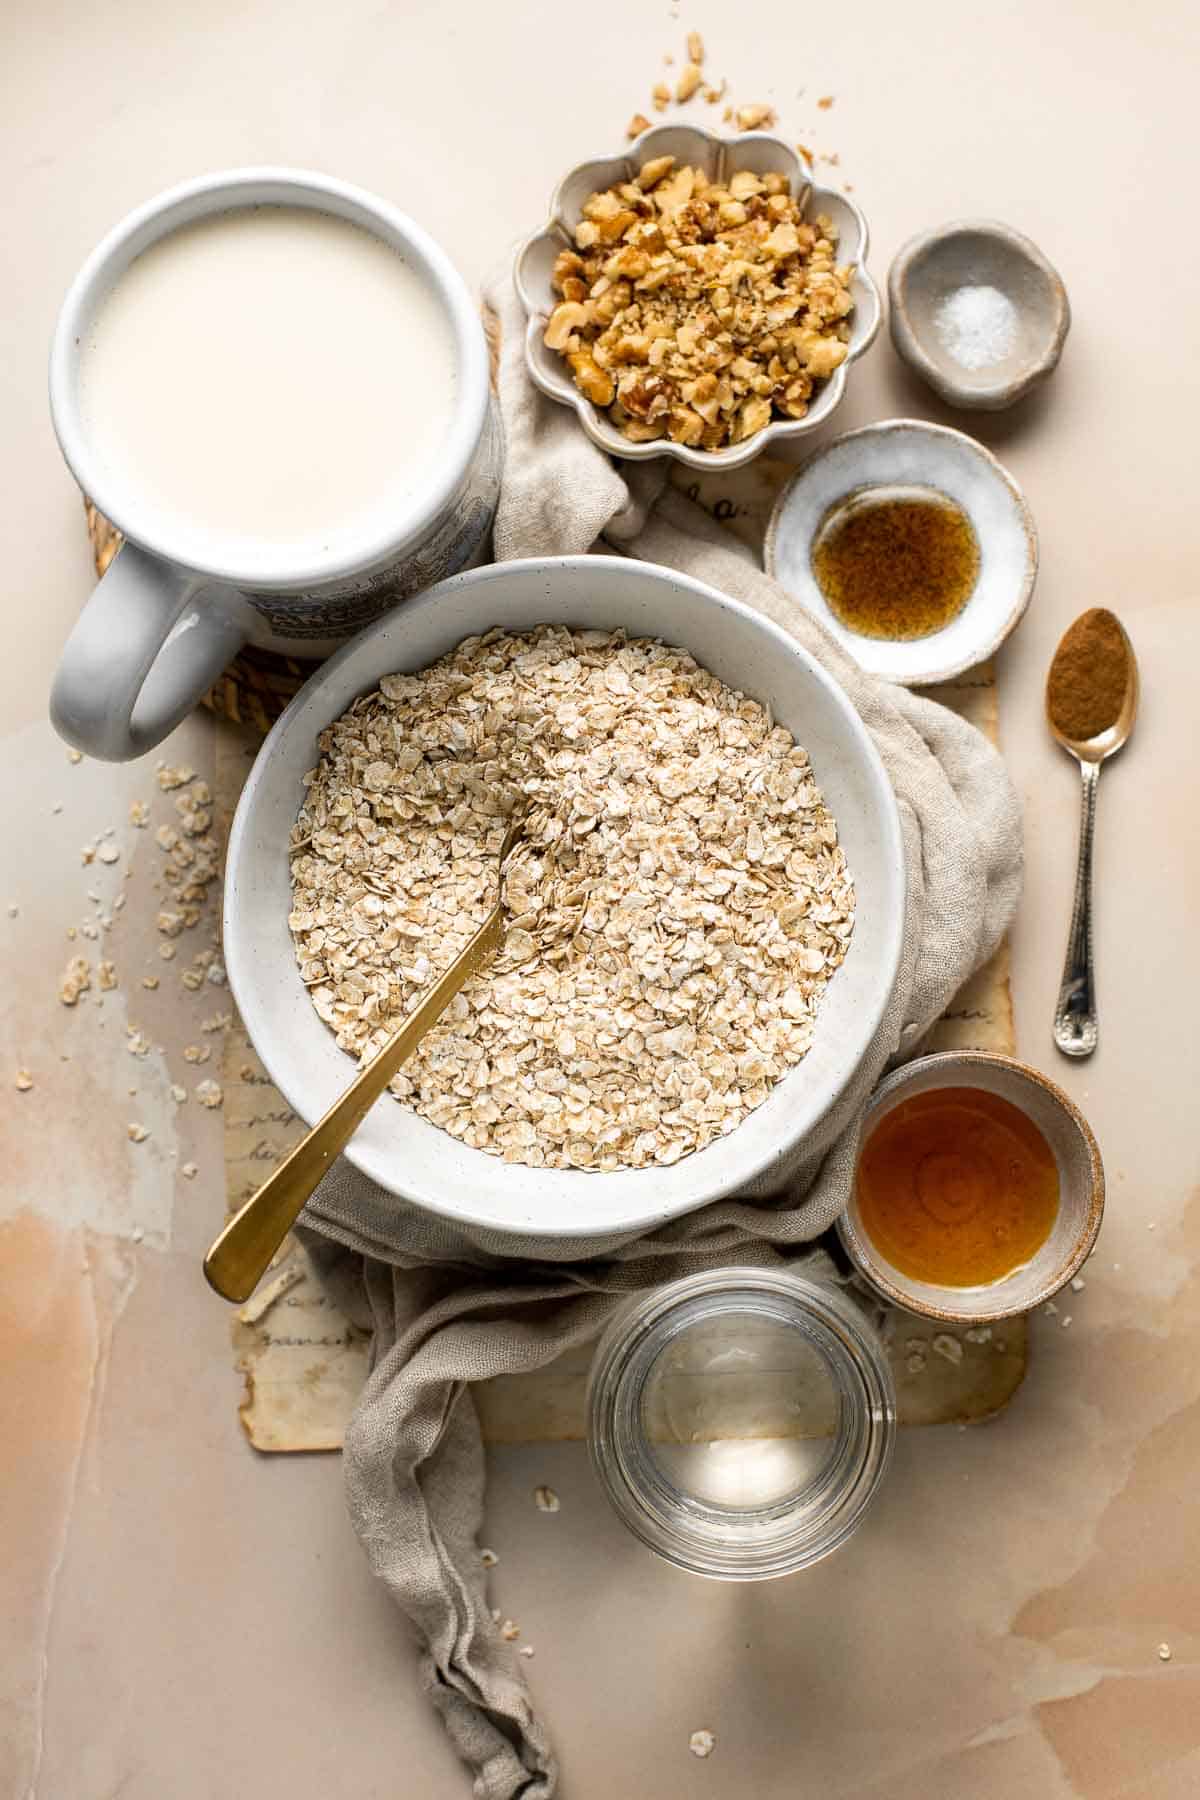 Oat Porridge is a healthy, delicious breakfast that's warm, comforting, cozy, and great for all ages. A quick easy recipe to warm you up on cold mornings. | aheadofthyme.com